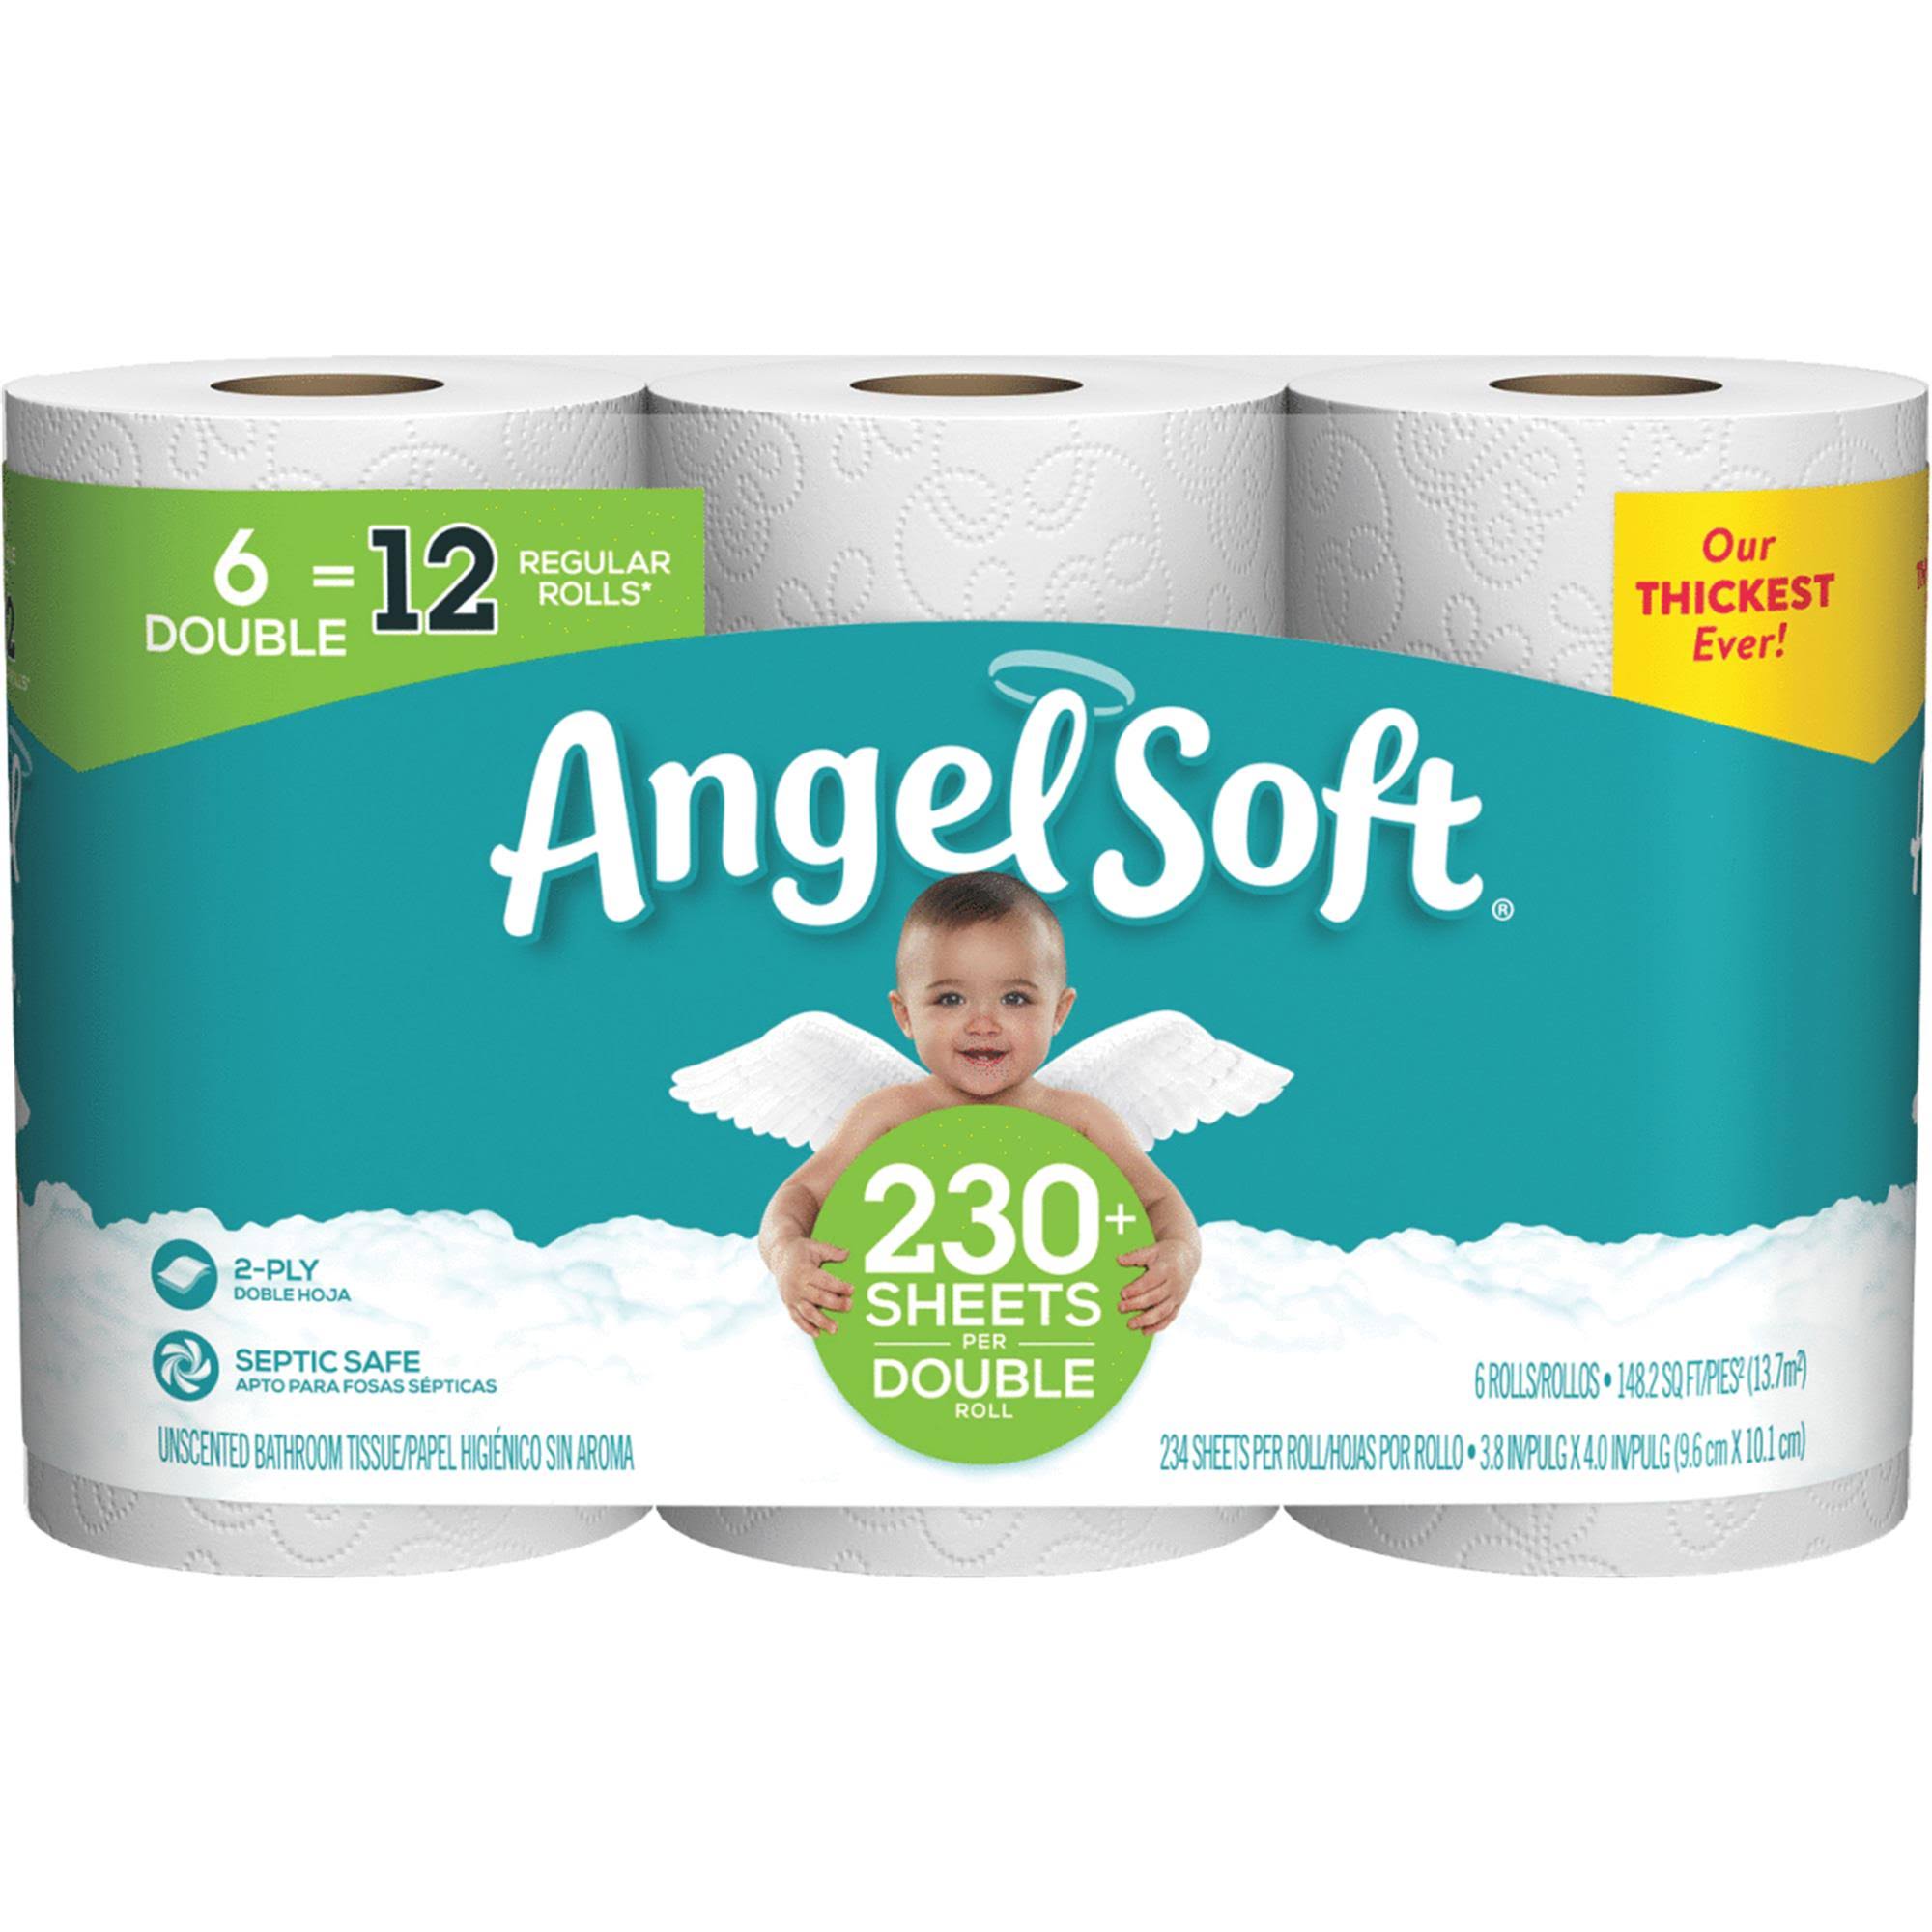 Angel Soft Bathroom Tissue, Unscented, Double Roll, 2-Ply - 6 rolls